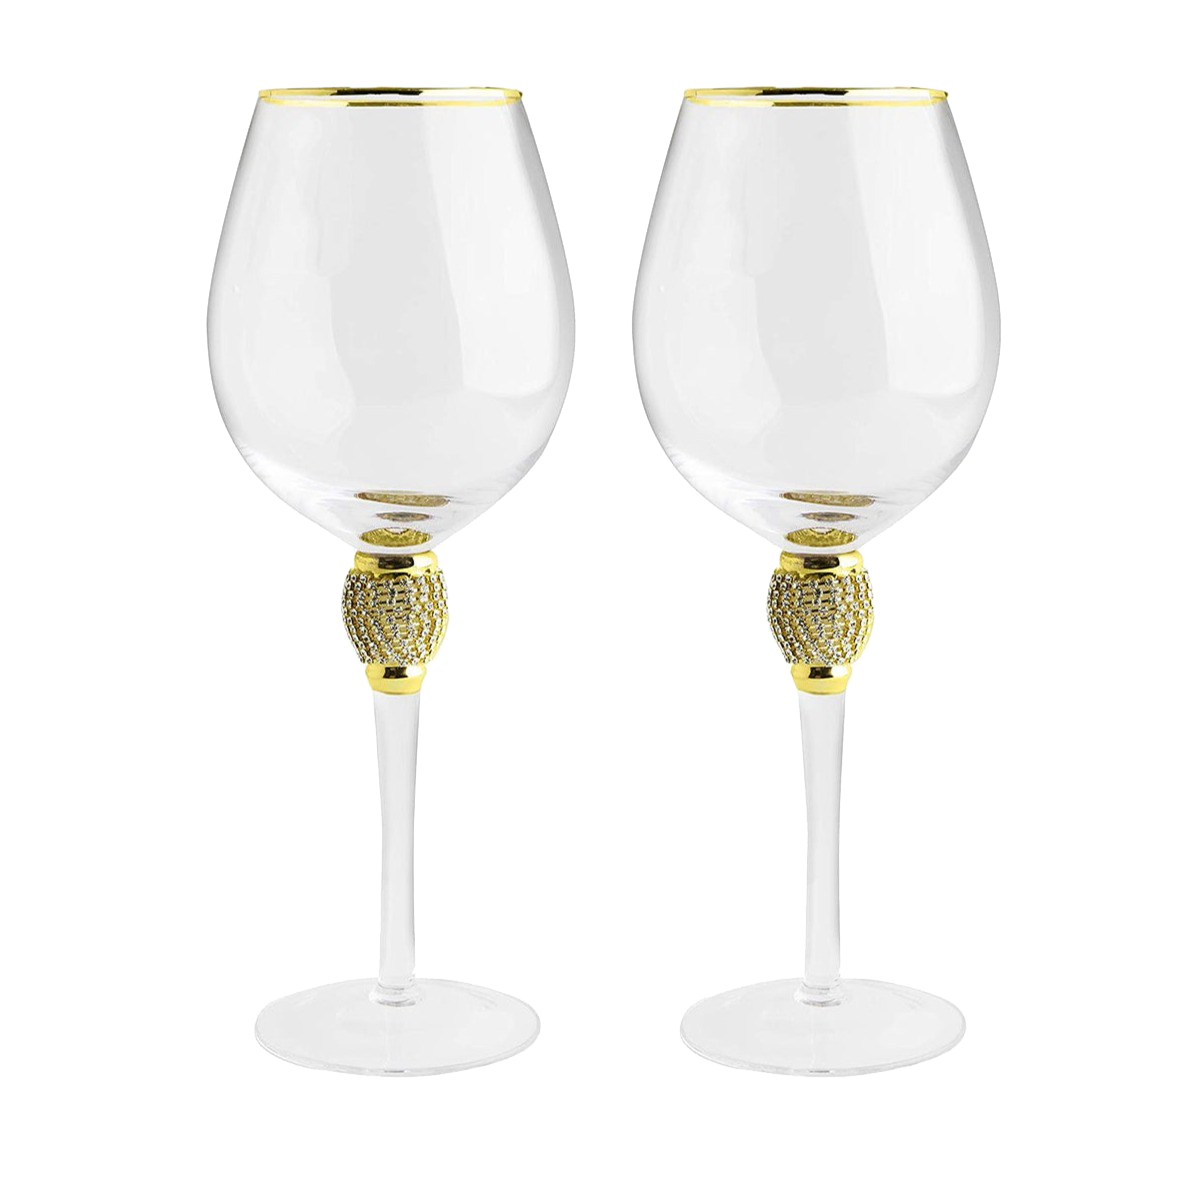 The Wine Savant Large Diamond Wine Glasses, Gold Rim Rhinestone Diamond Glasses - Wedding Glasses - 15 Ounce, Premium Designed Wine Glasses for Spirits and Wine, Gift Boxed (2, Clear)-0